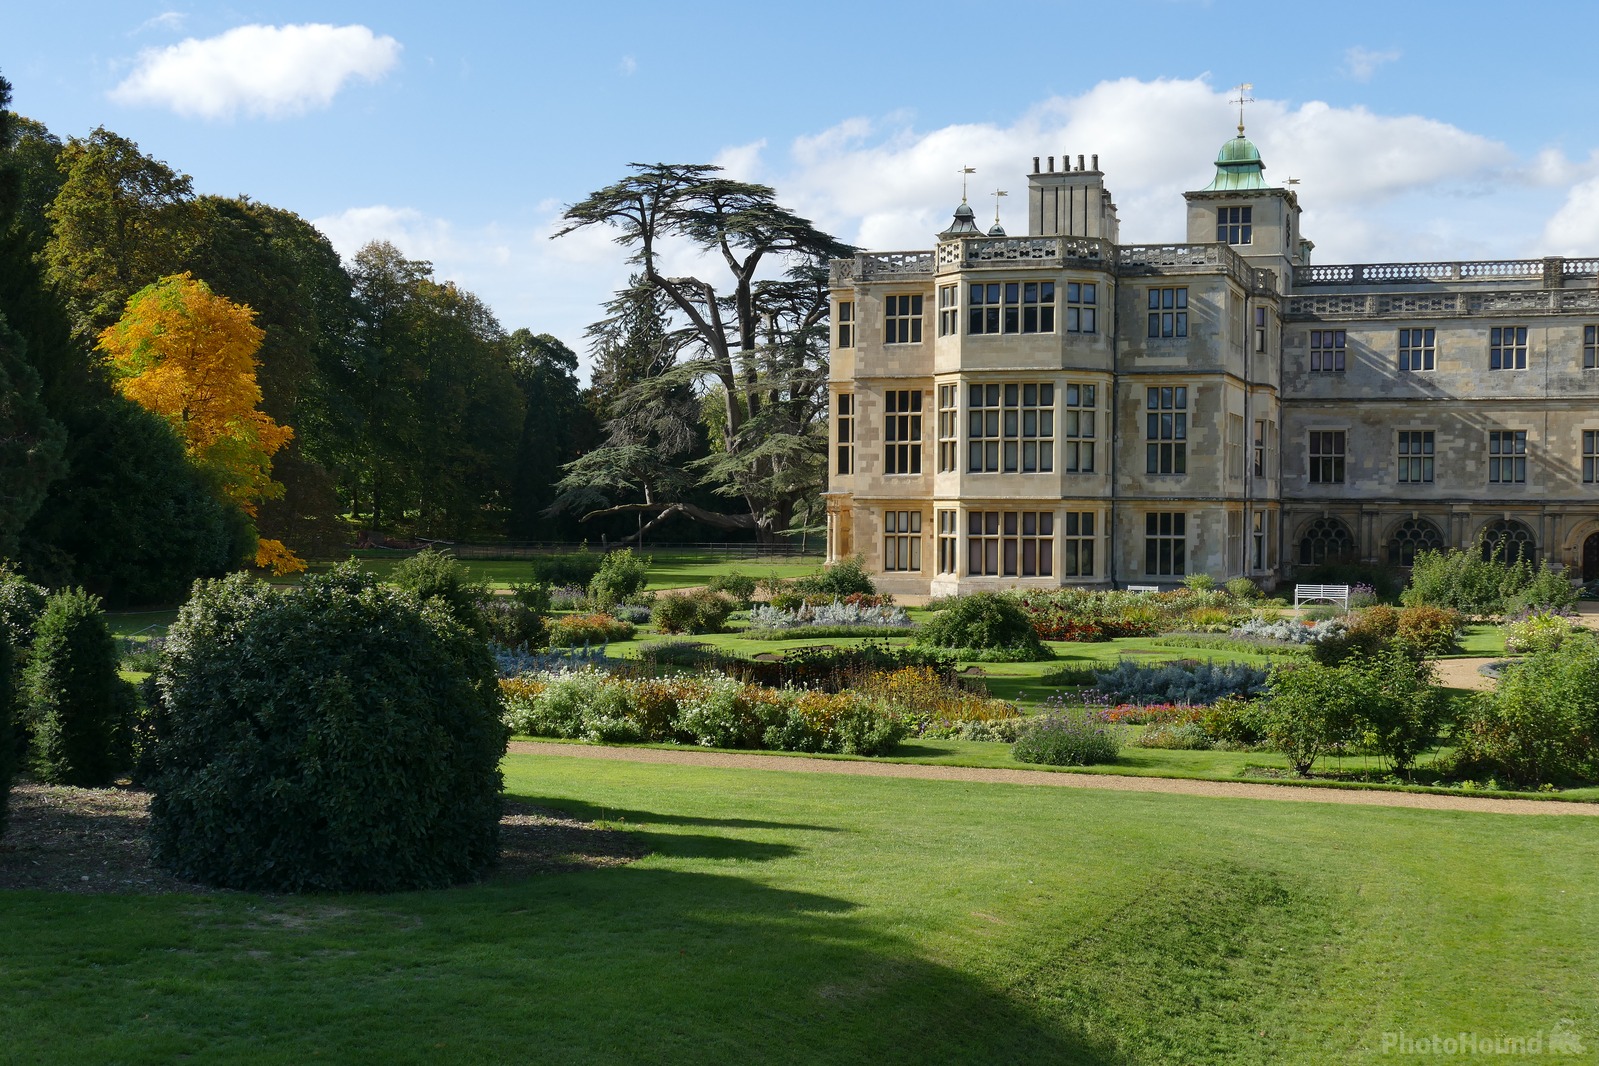 Image of Audley End house and garden by Harold Neale